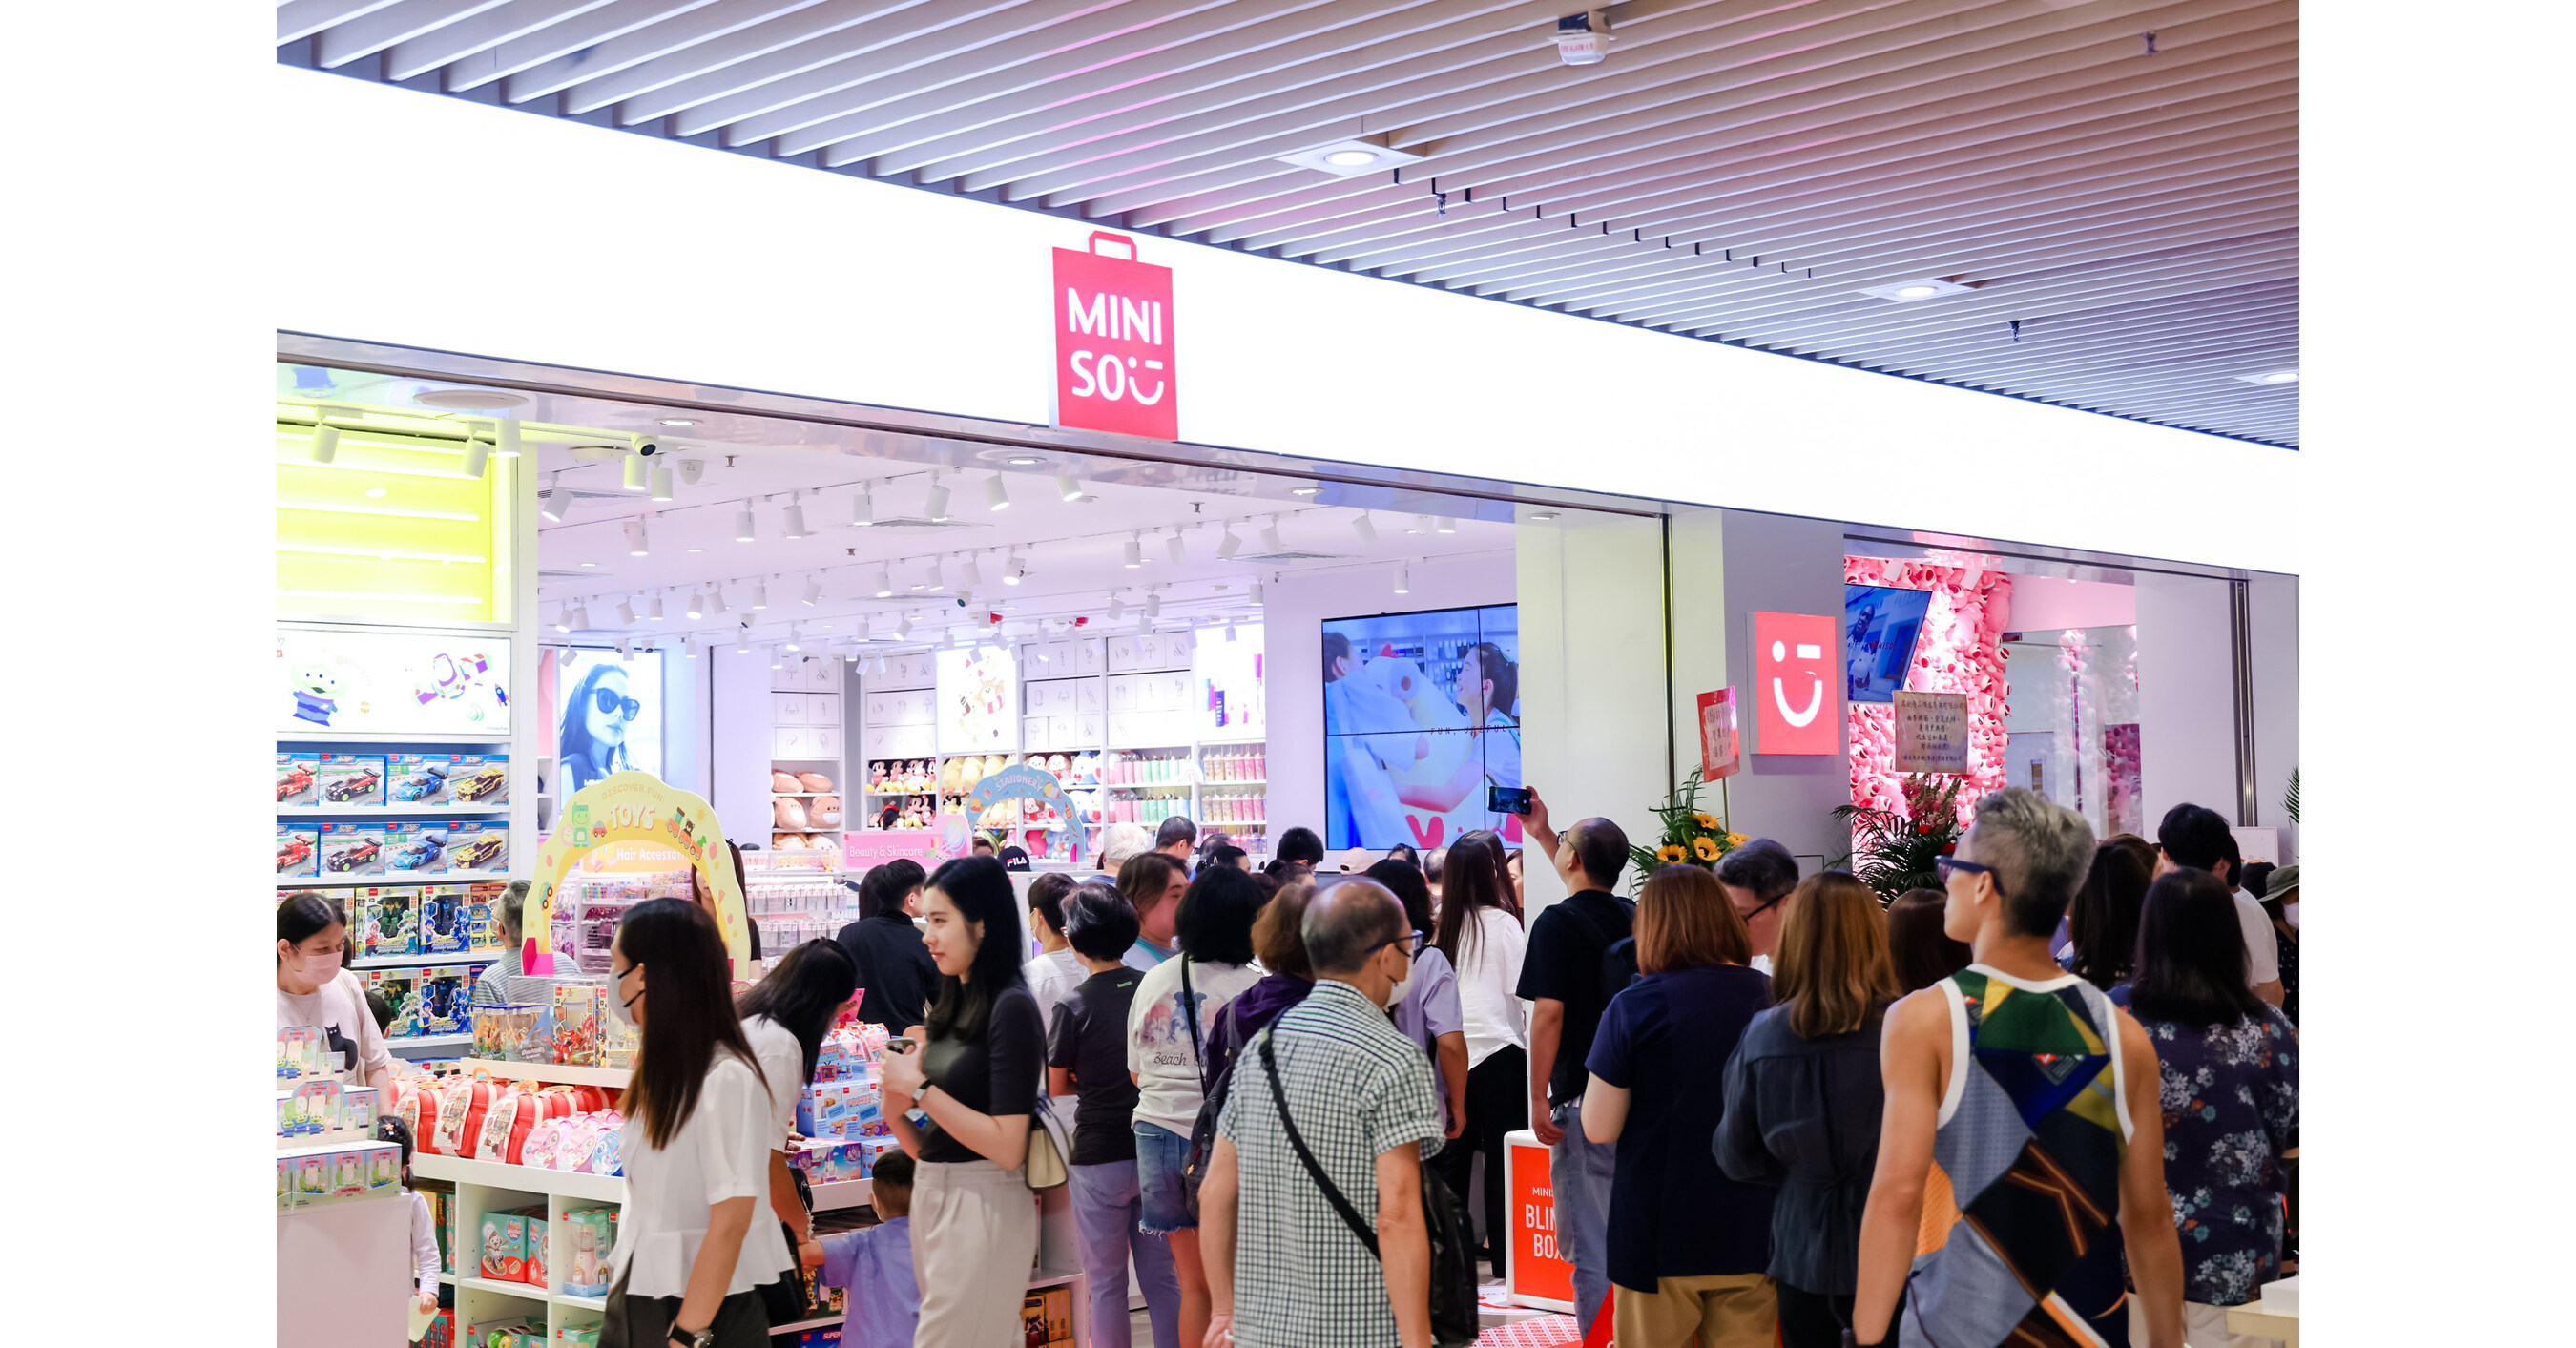 MINISO Opens Three New Stores in Hong Kong as Part of Ongoing